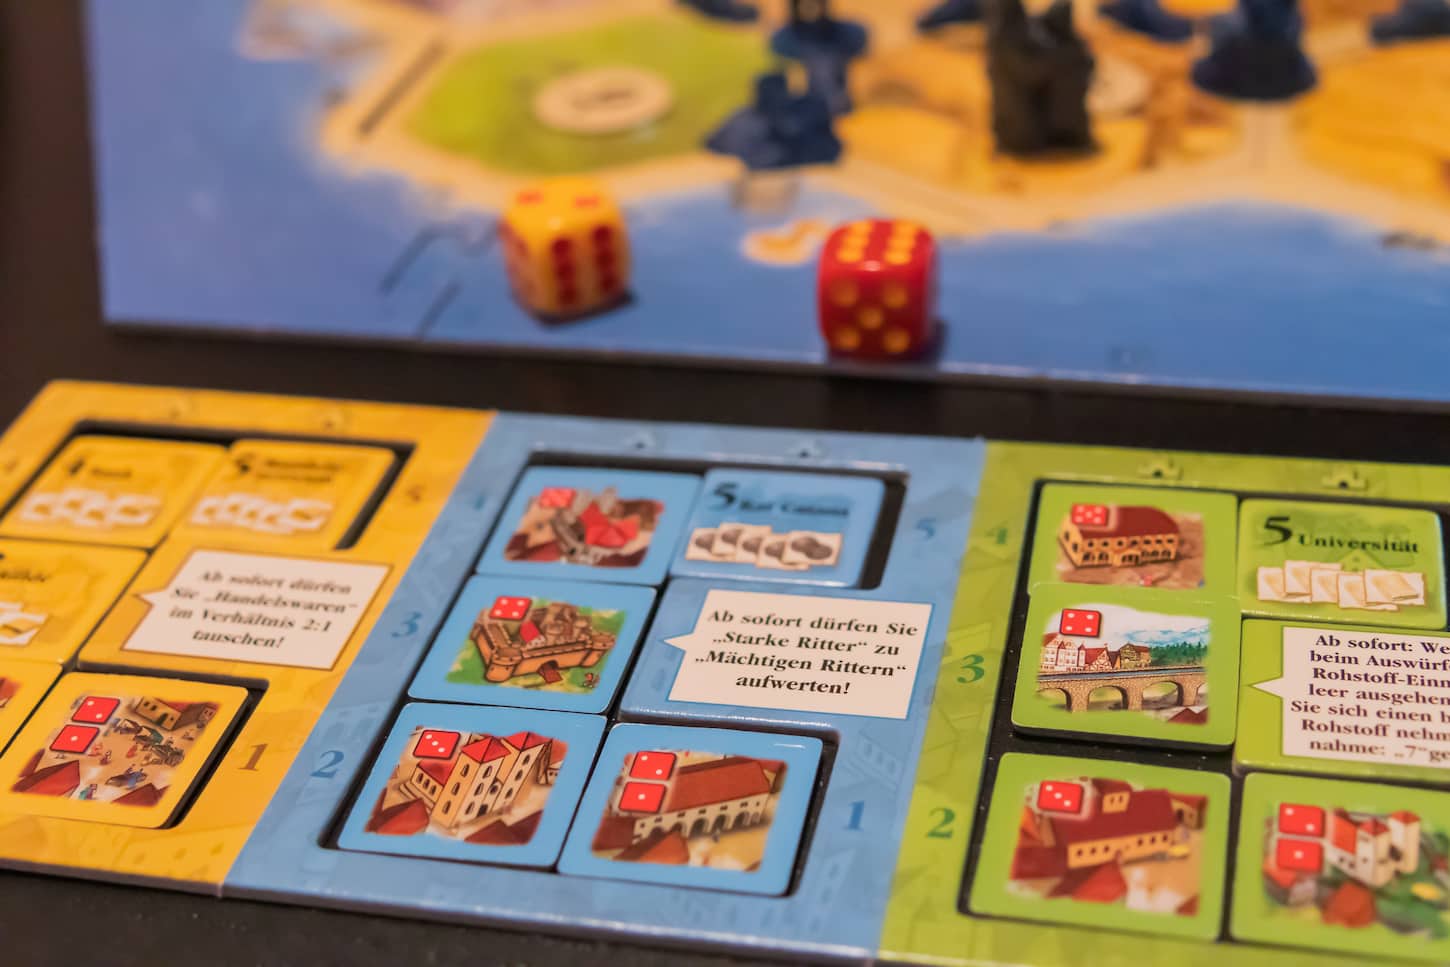 An image of a German board game called The Settlers of Catan.